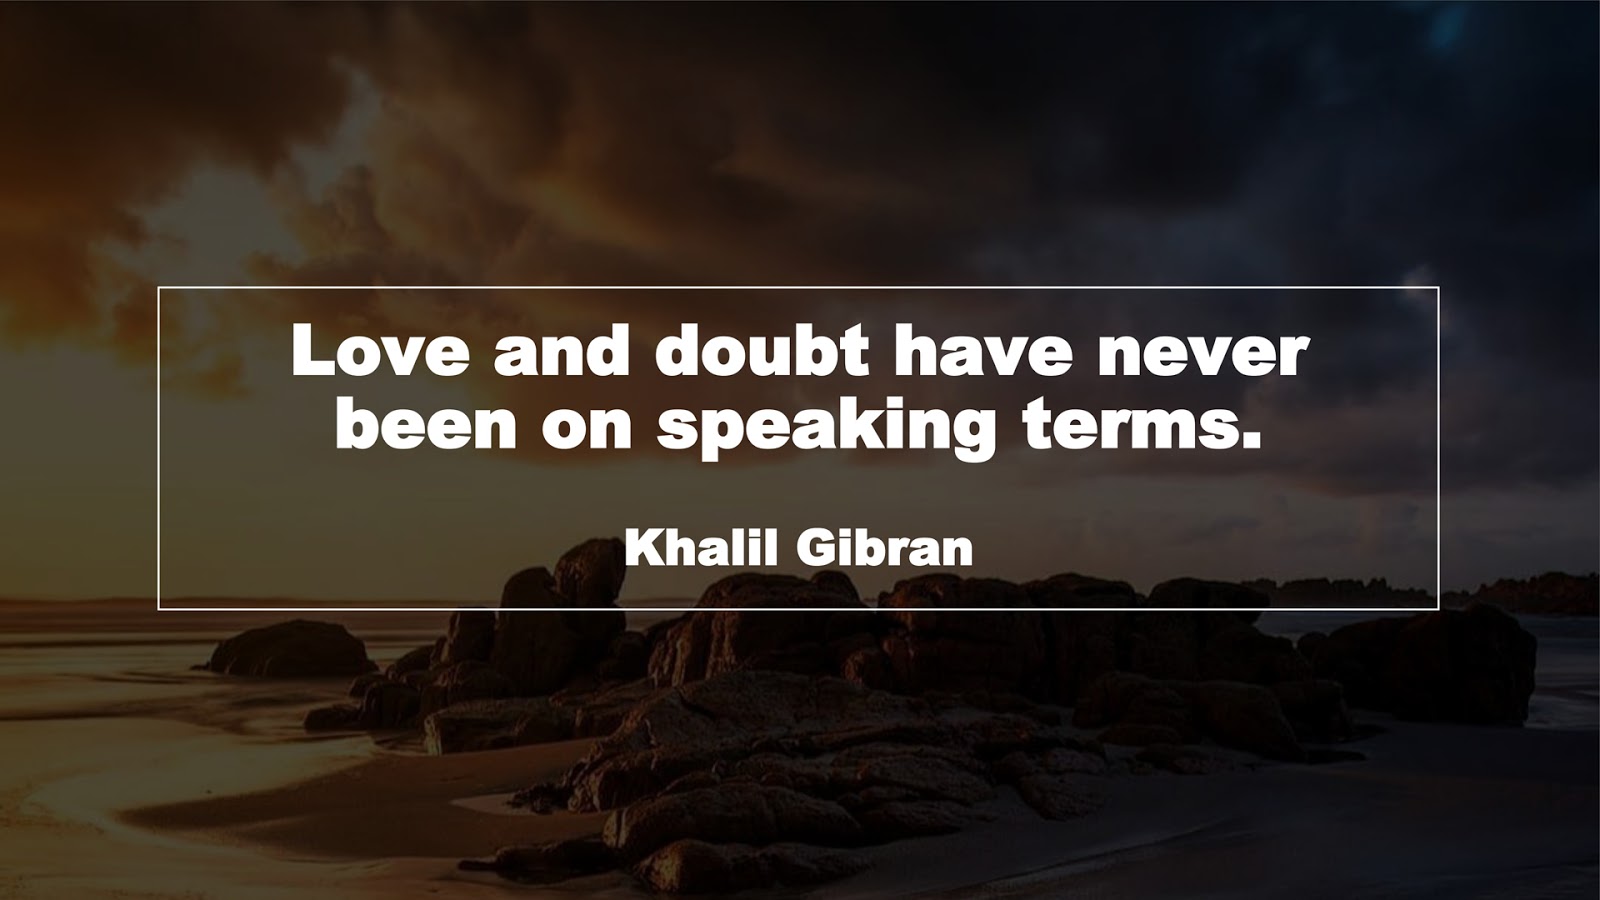 Love and doubt have never been on speaking terms. (Khalil Gibran)